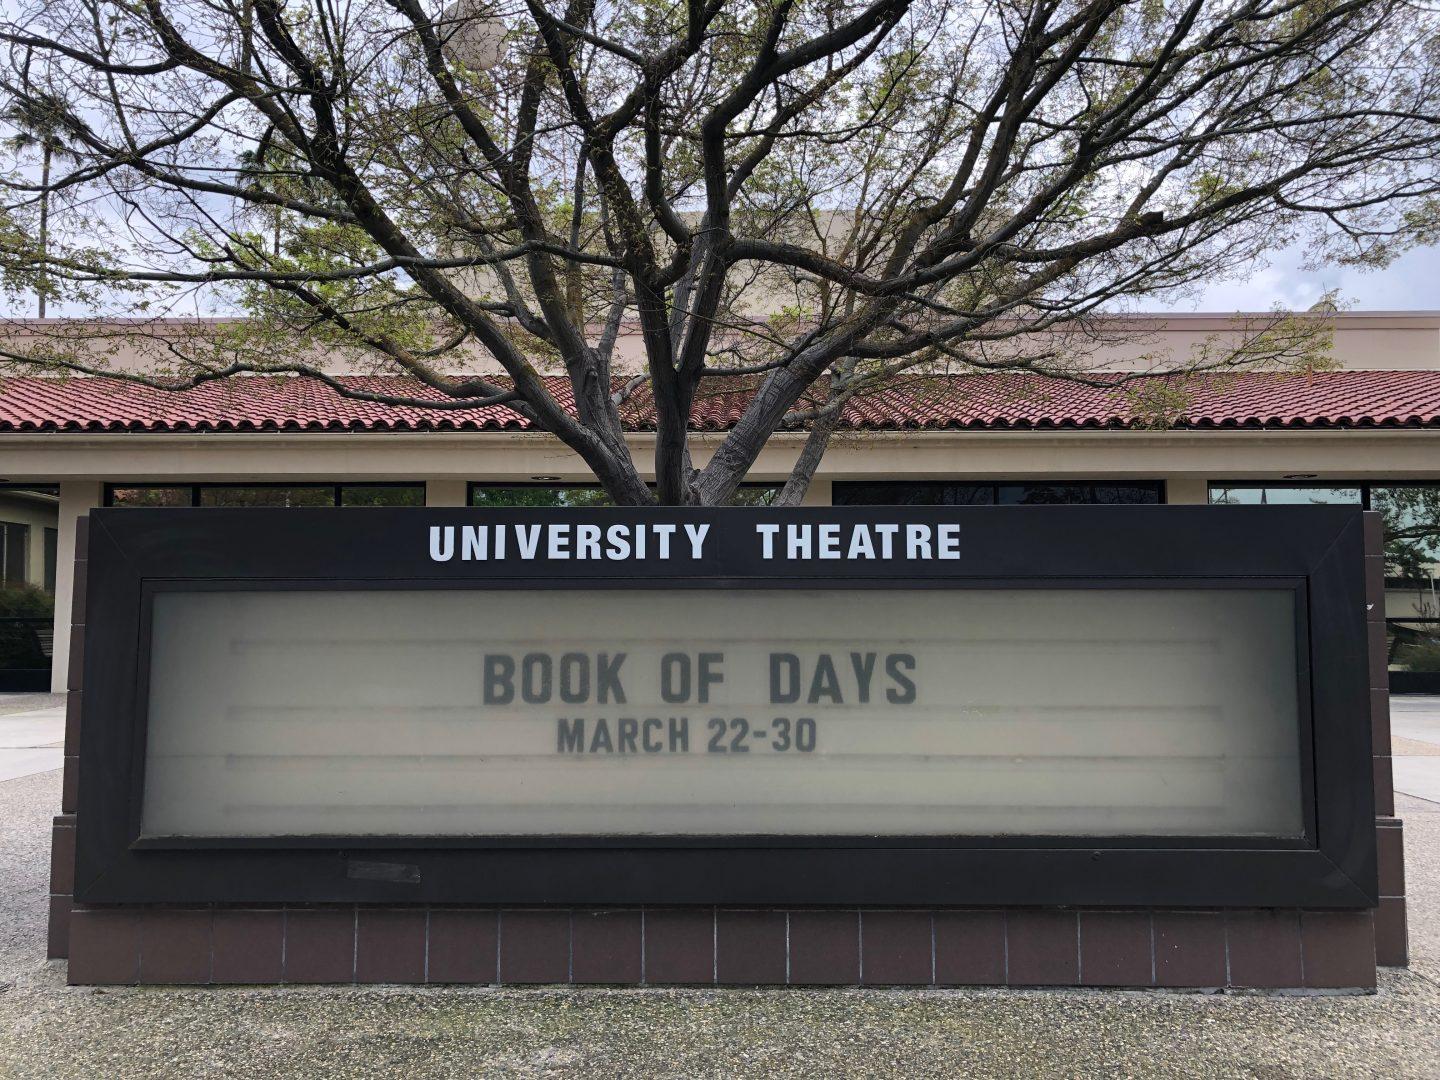 The production Book of Days will be opening Friday at 7:30 p.m. in the Dennis and Cheryl Woods Theatre. (Marilyn Castaneda/The Collegian)